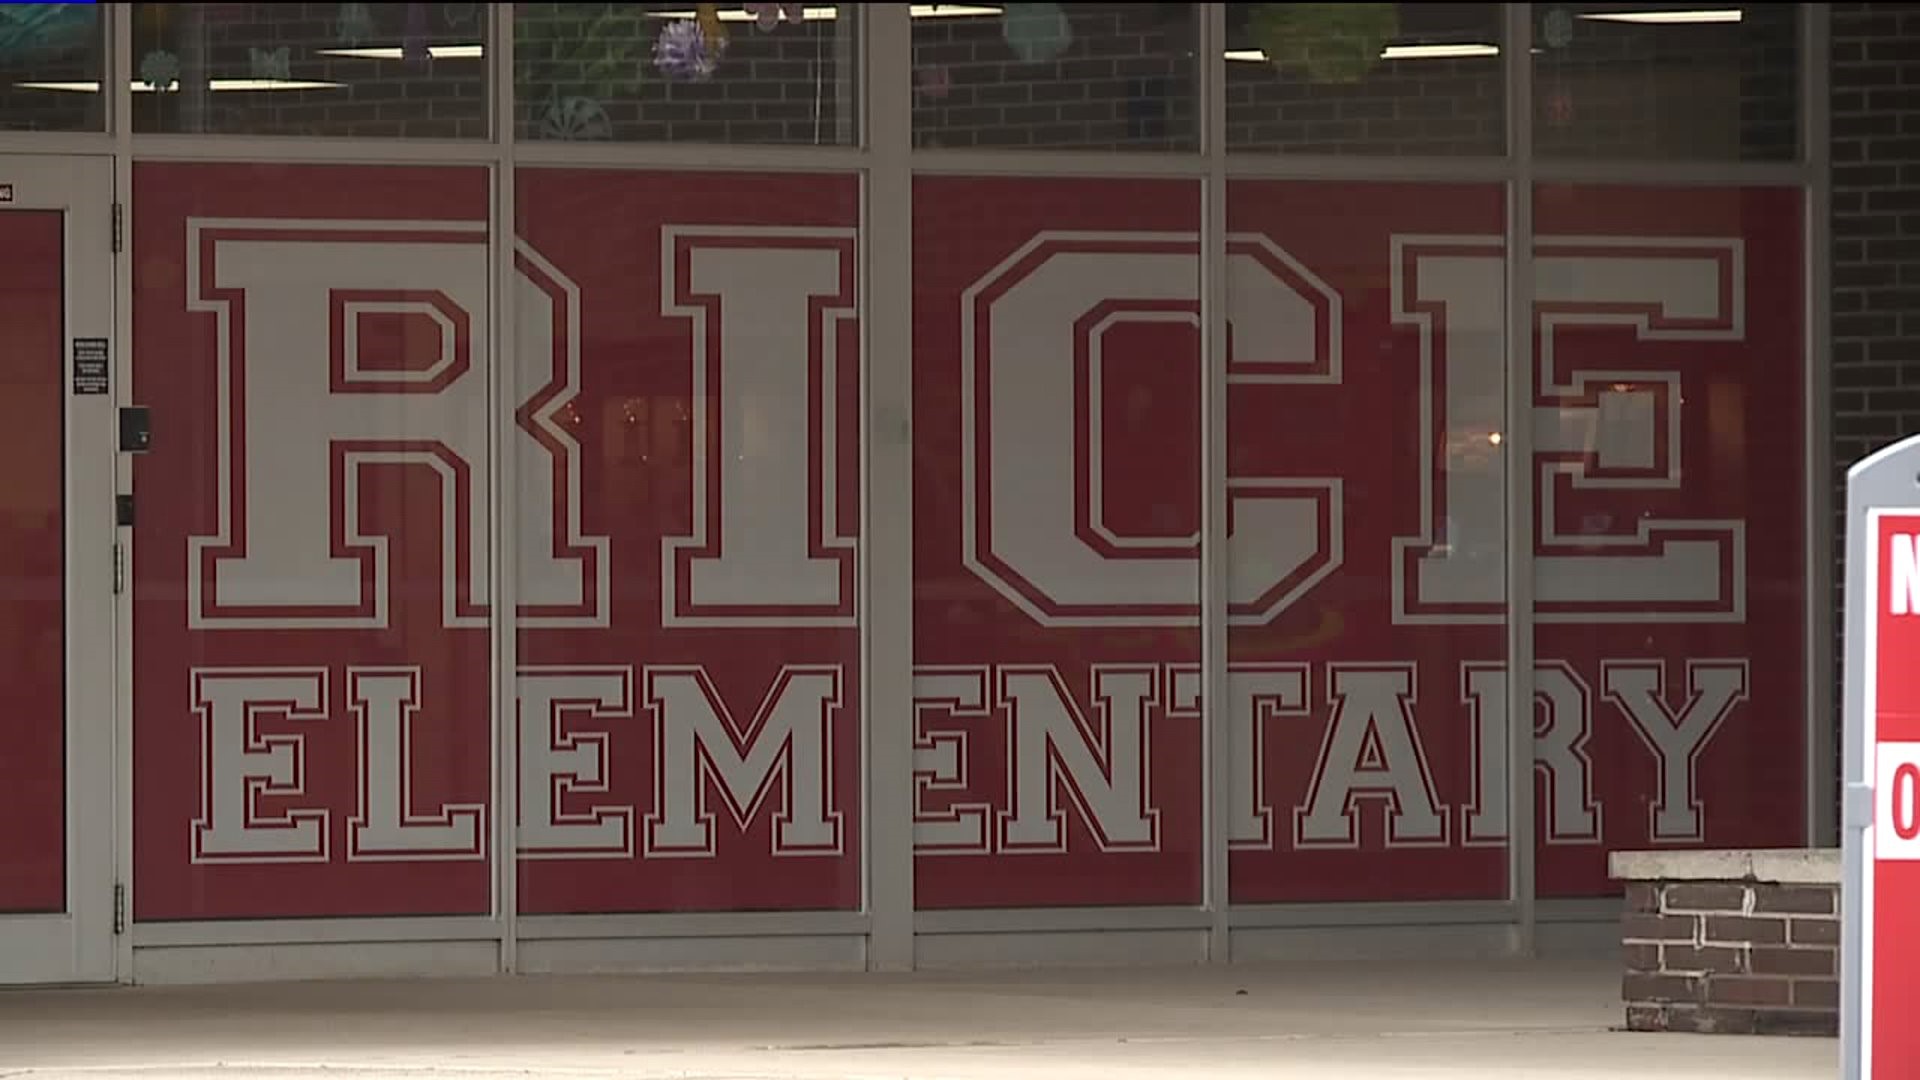 Police Investigating Threat at Rice Elementary